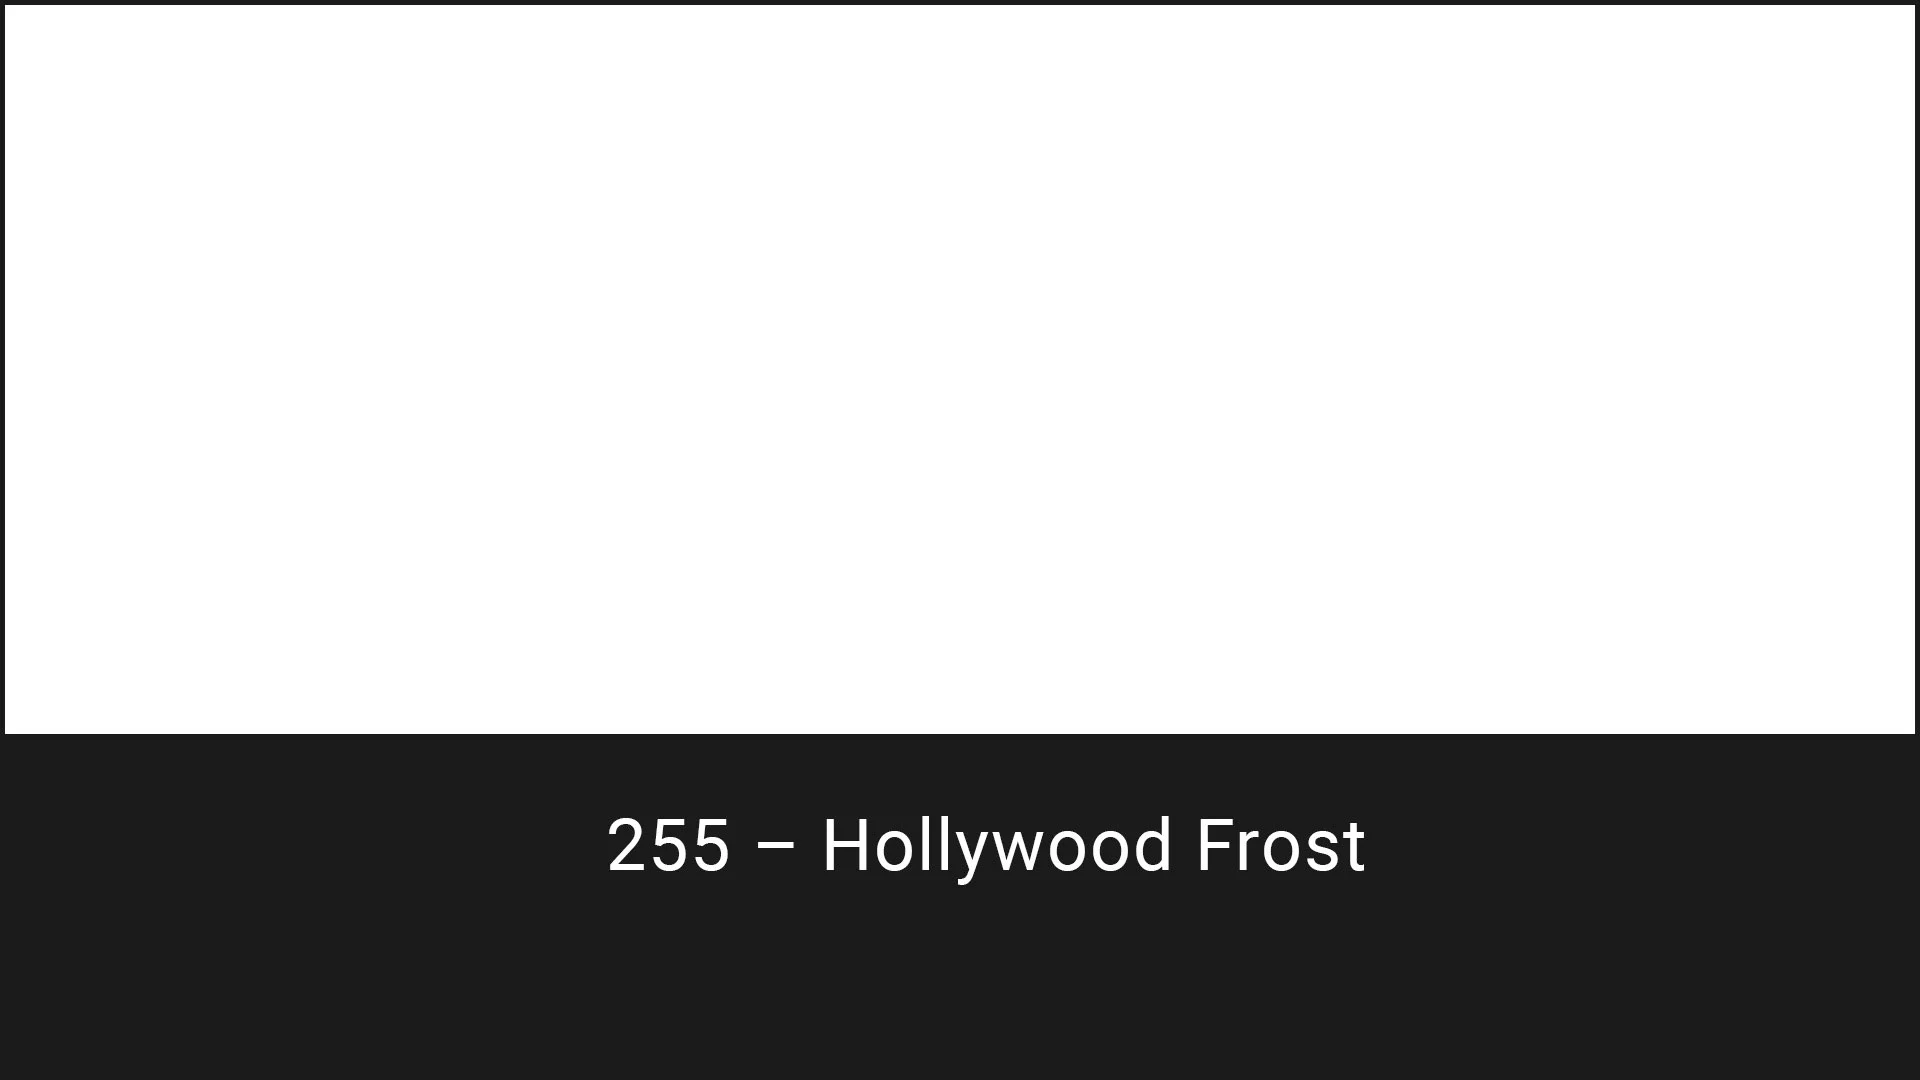 Cotech filters 255 Hollywood Frost